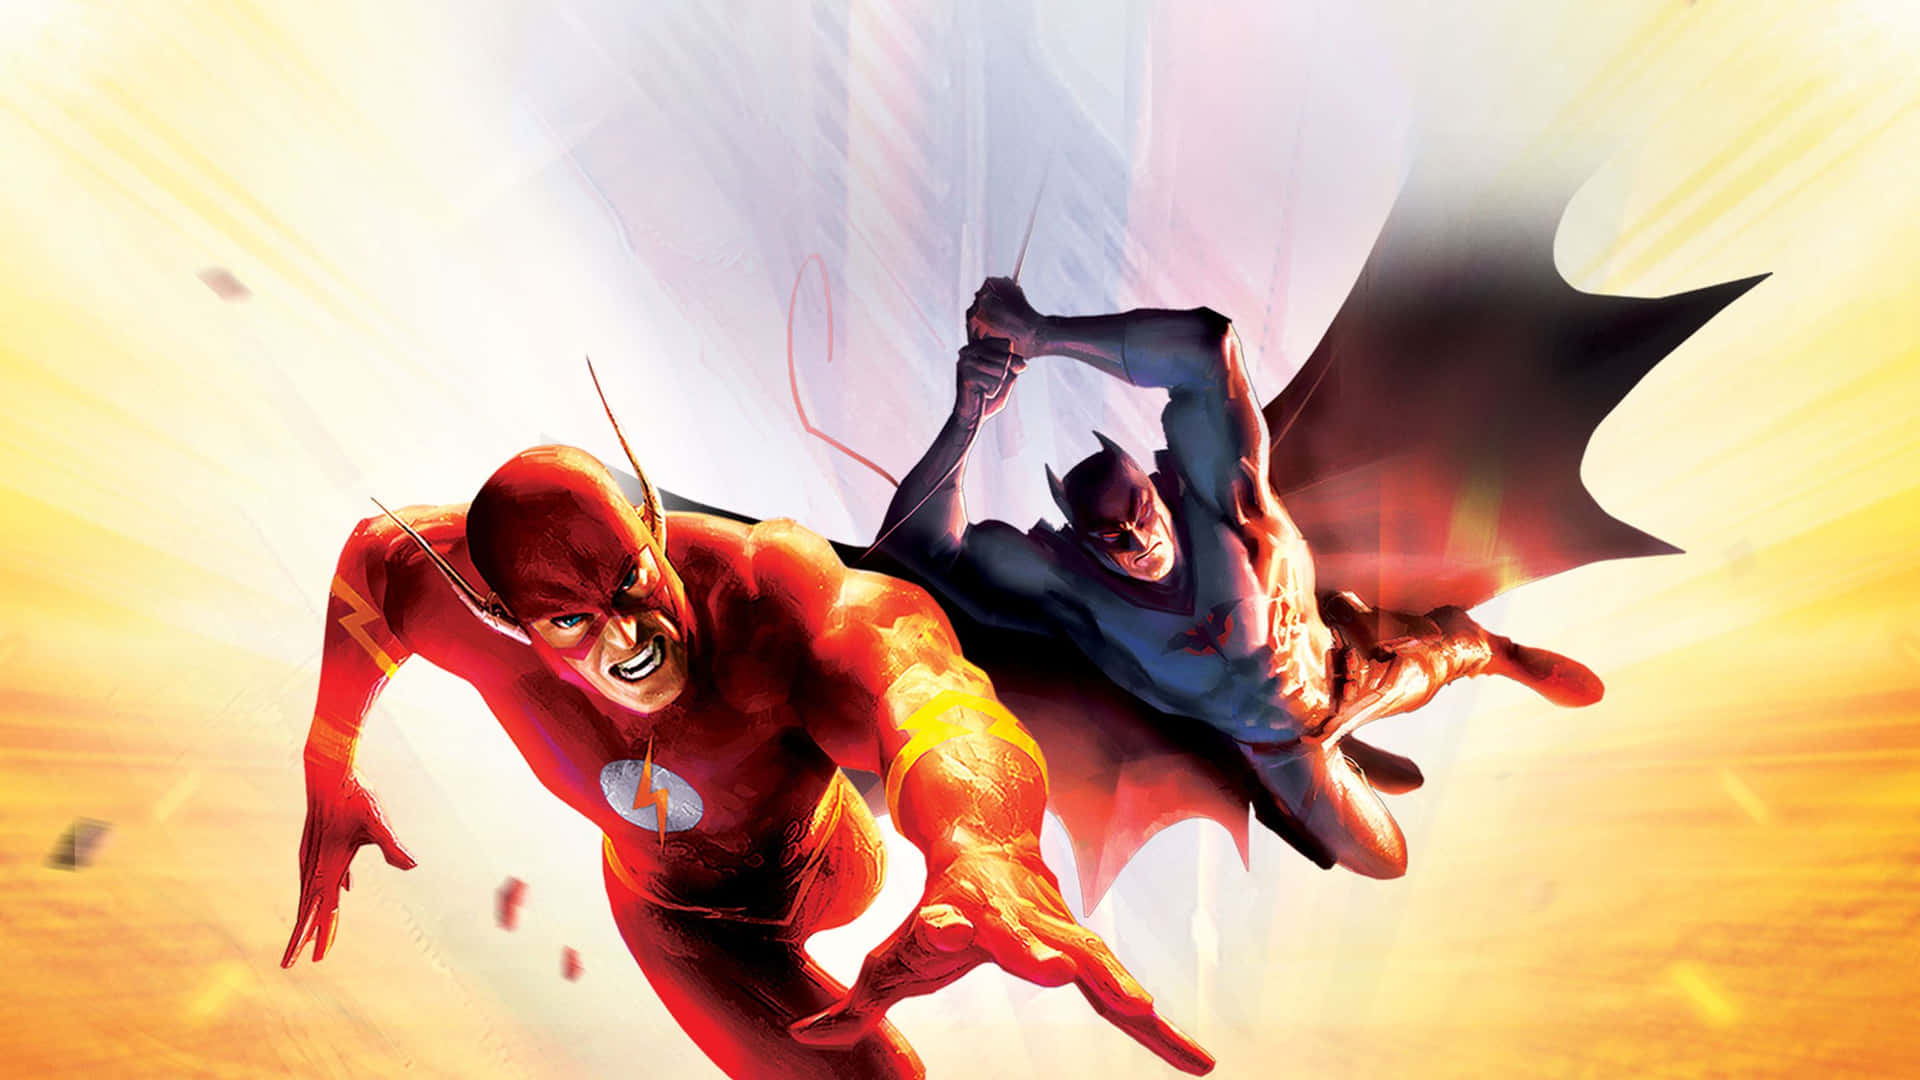 The Flash racing through time in Justice League: The Flashpoint Paradox Wallpaper